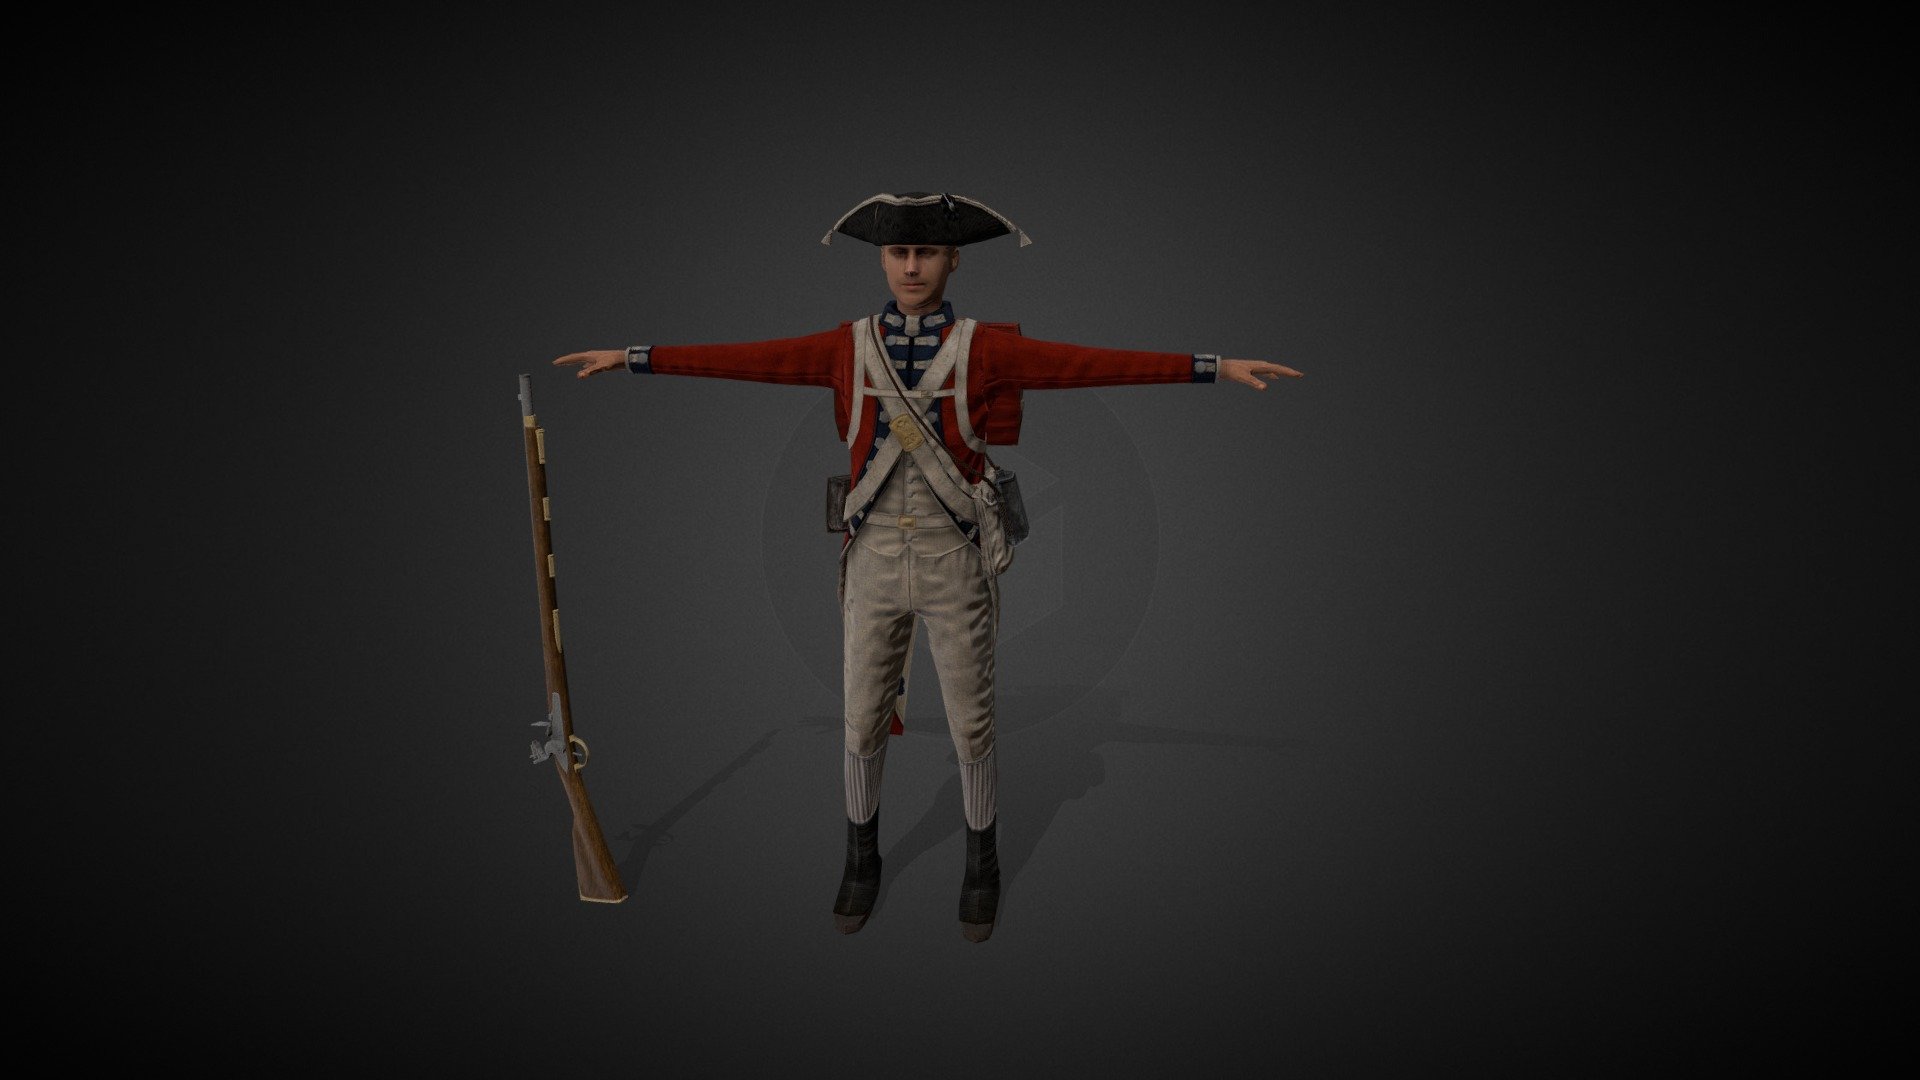 British 18th Century - Red Coat - 23rd

Low poly, game ready model for RTS im working on. 




Maya

Substance

Paint.net to stitch texture together.

*One shared material for entire mesh 3d model